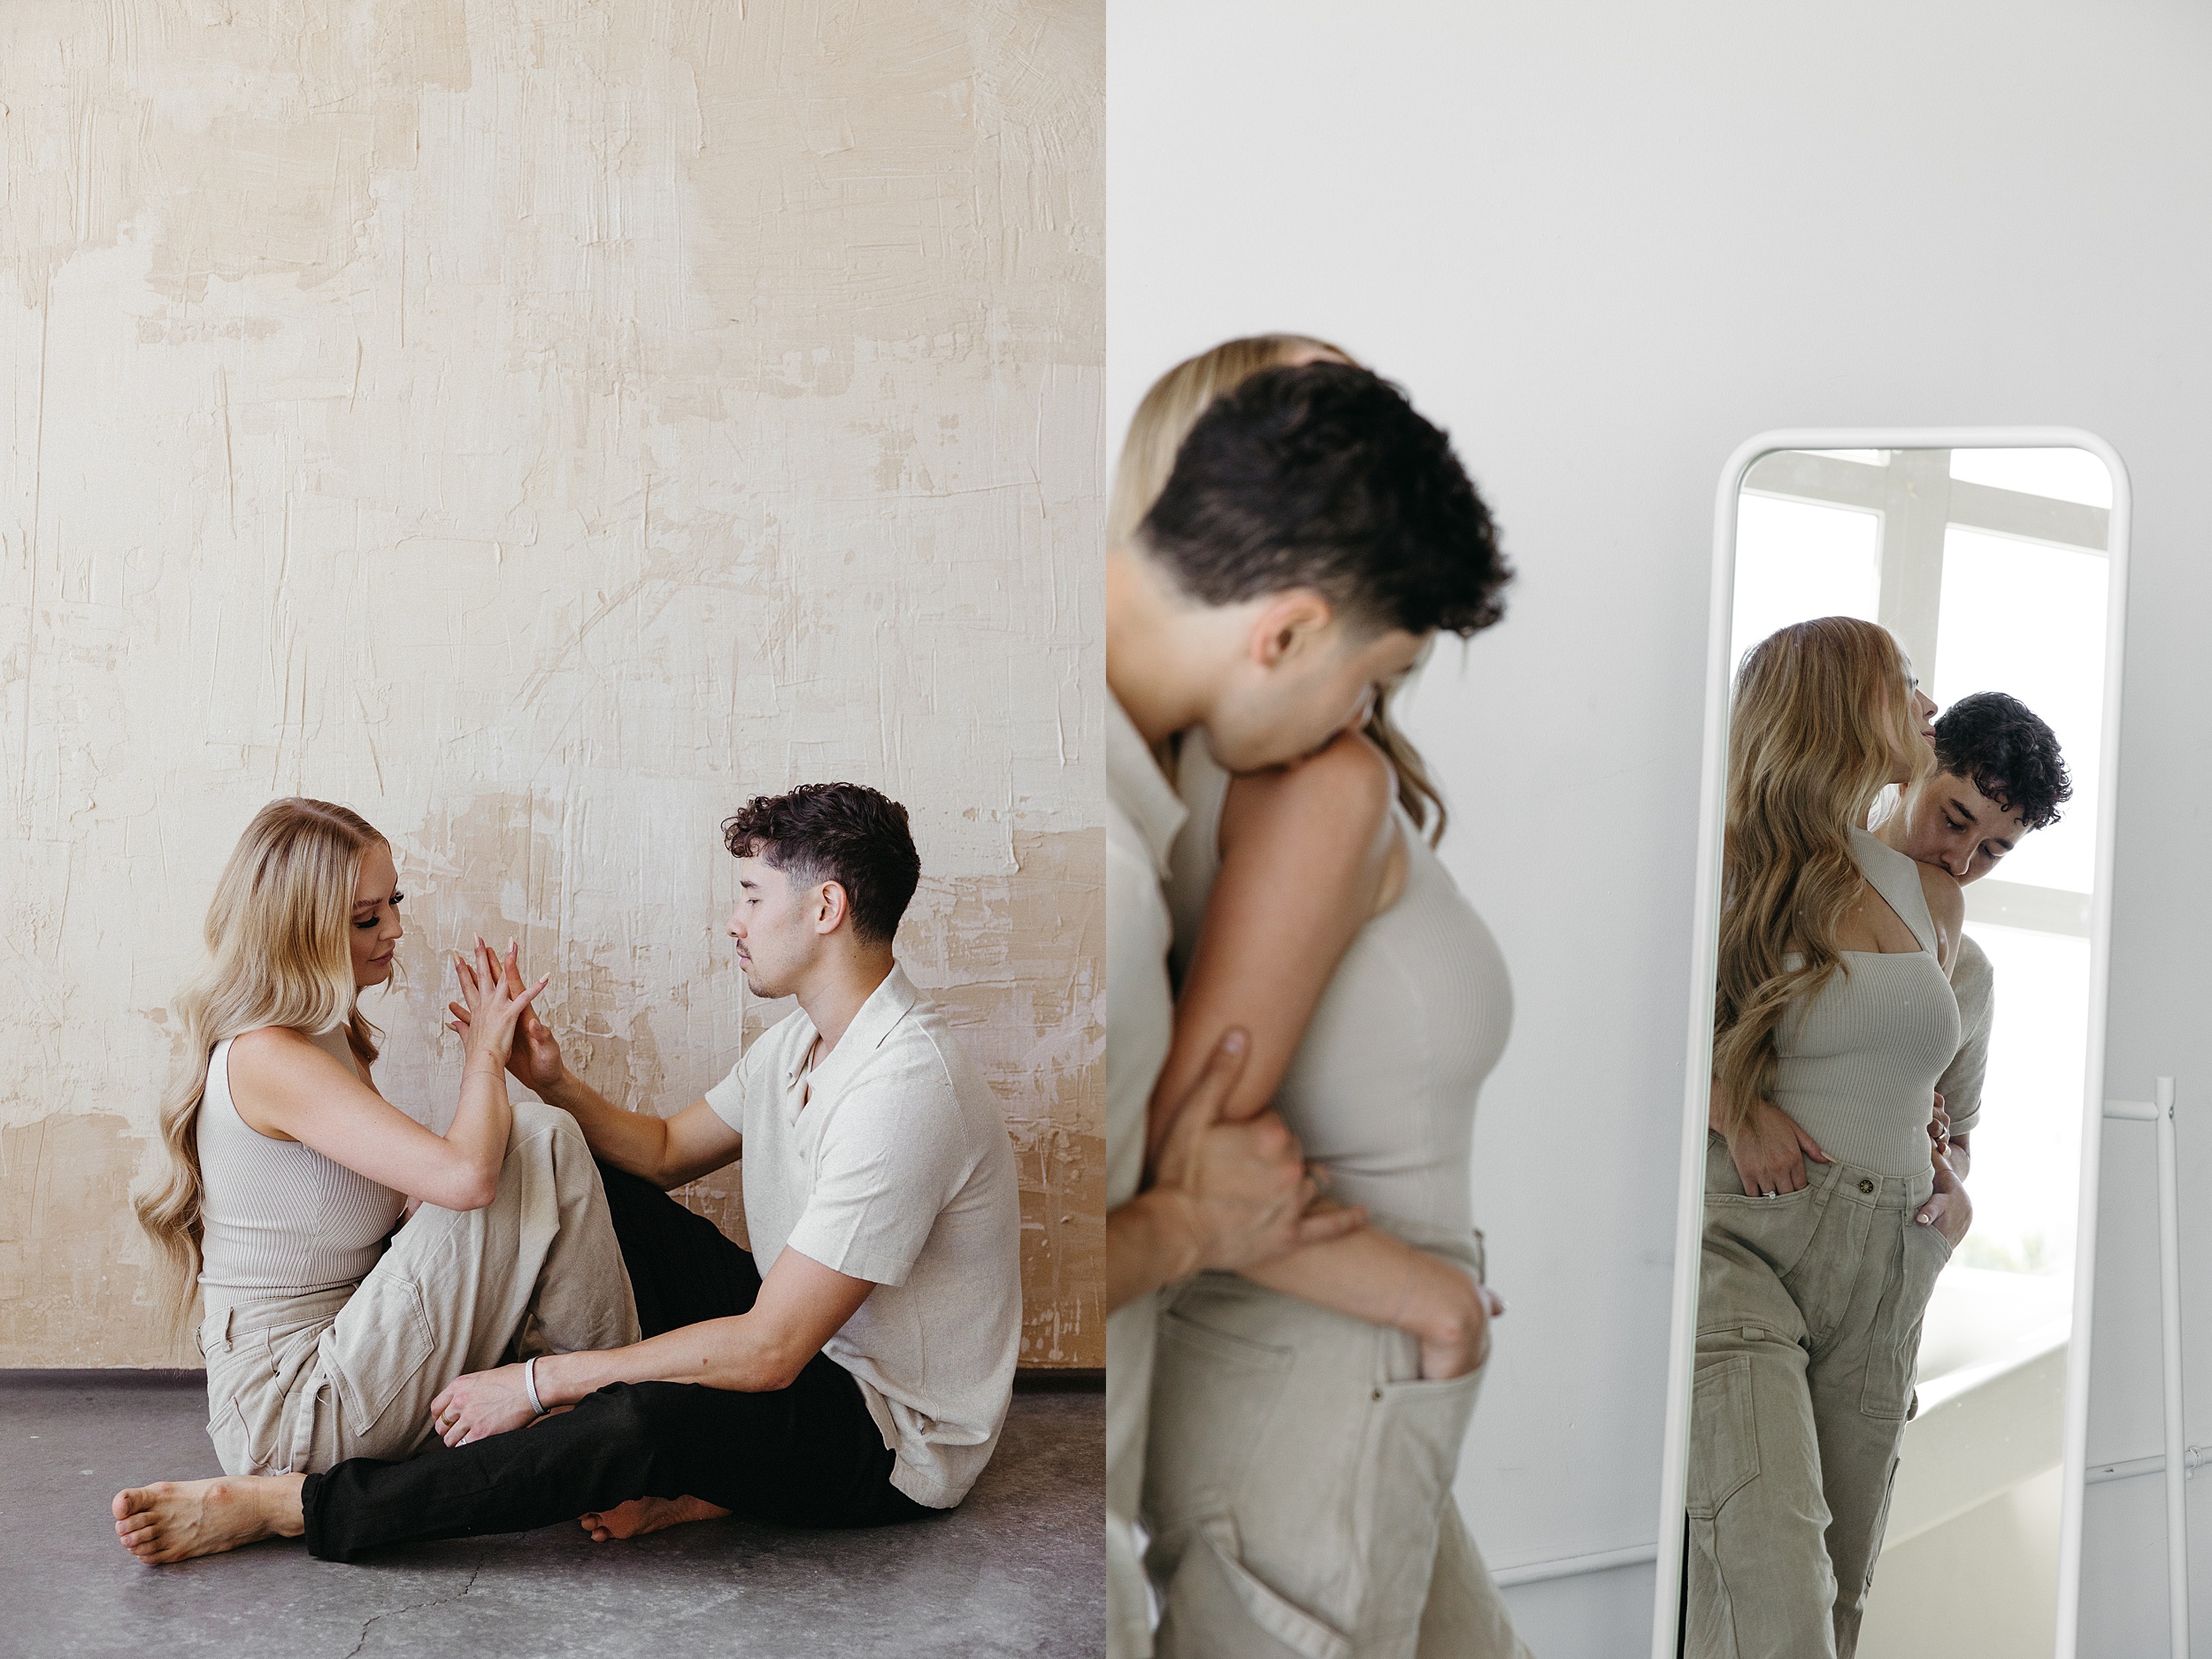 a woman with strawberry blonde hair wearing tan colored top and pants and a man with black hair posing for their Portland engagement photos